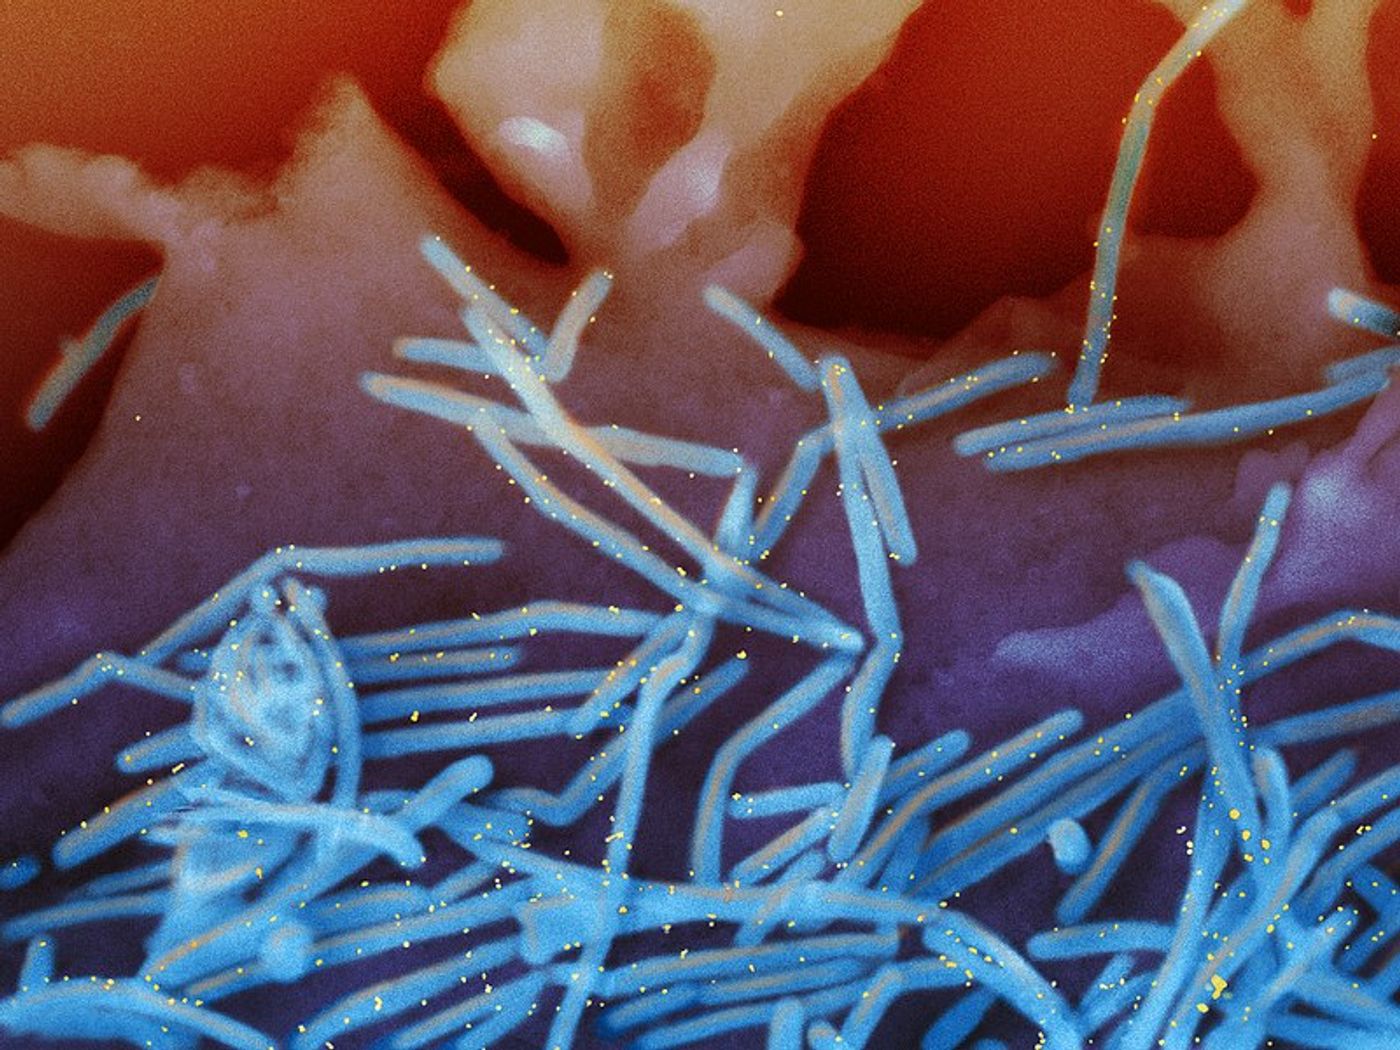 Scanning electron micrograph of human respiratory syncytial virus (RSV) virions (colorized blue). Credit: NIAID